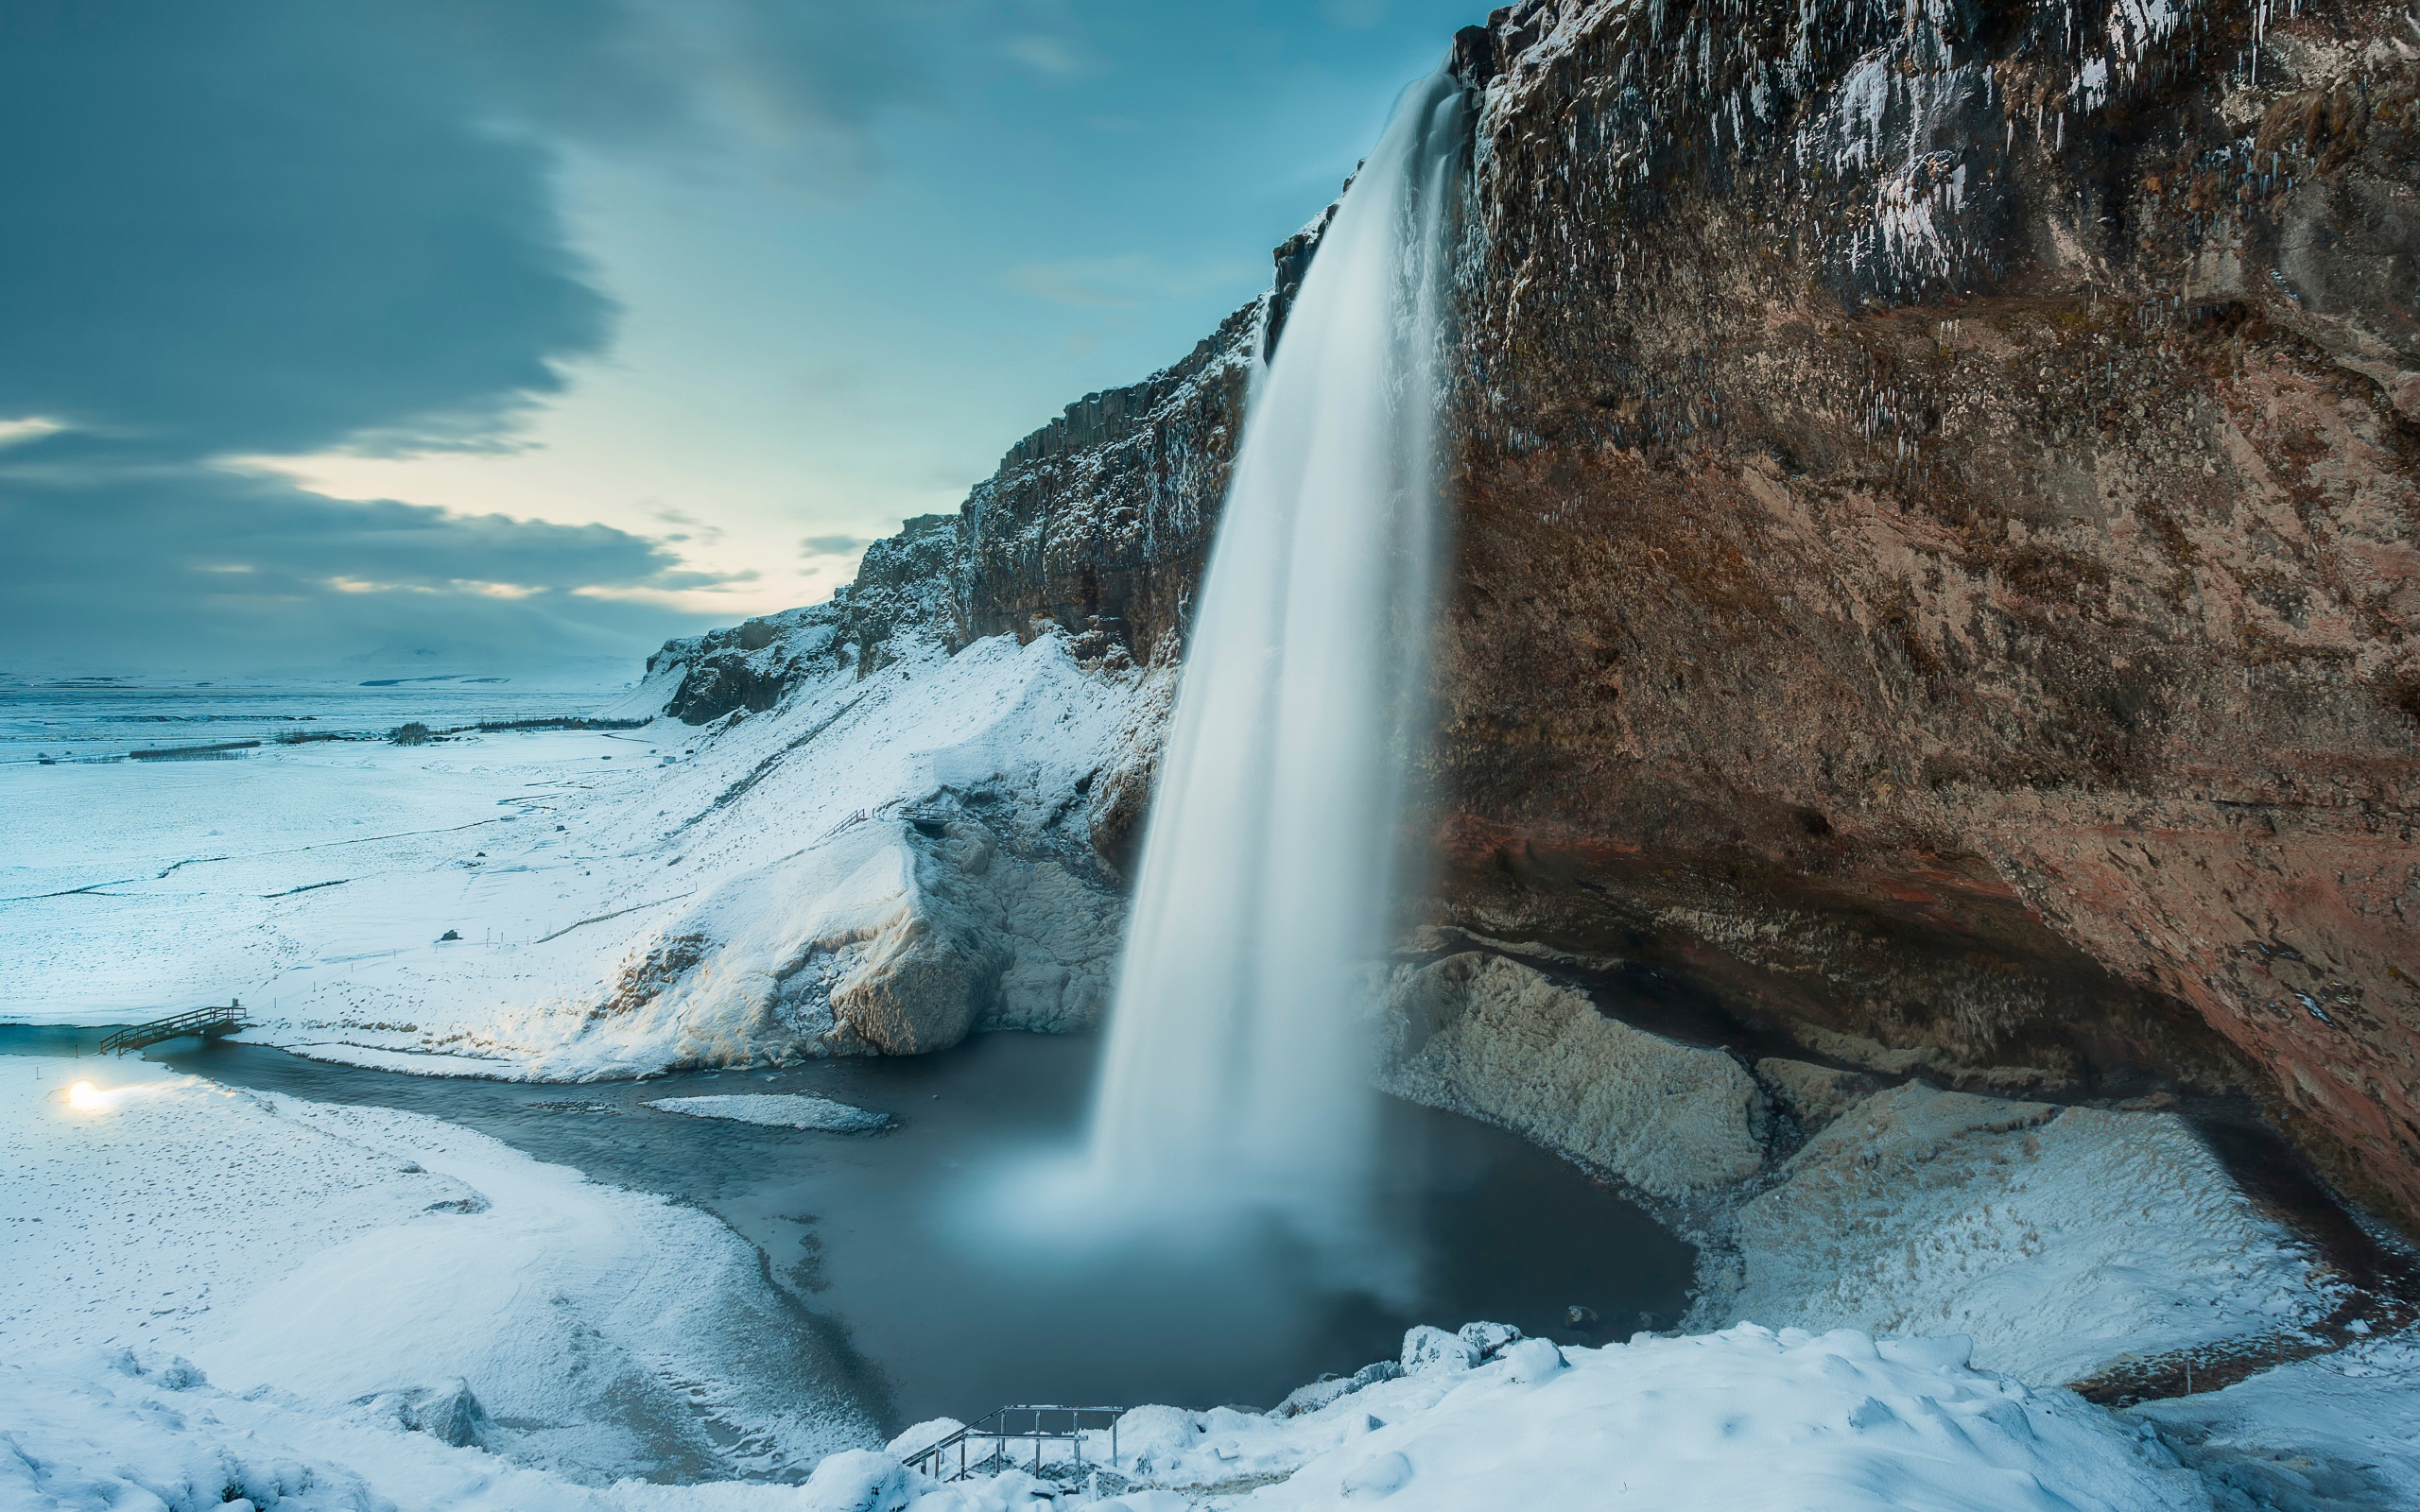 The waterfall drains from a cliff against a background of snow-covered nature, Iceland